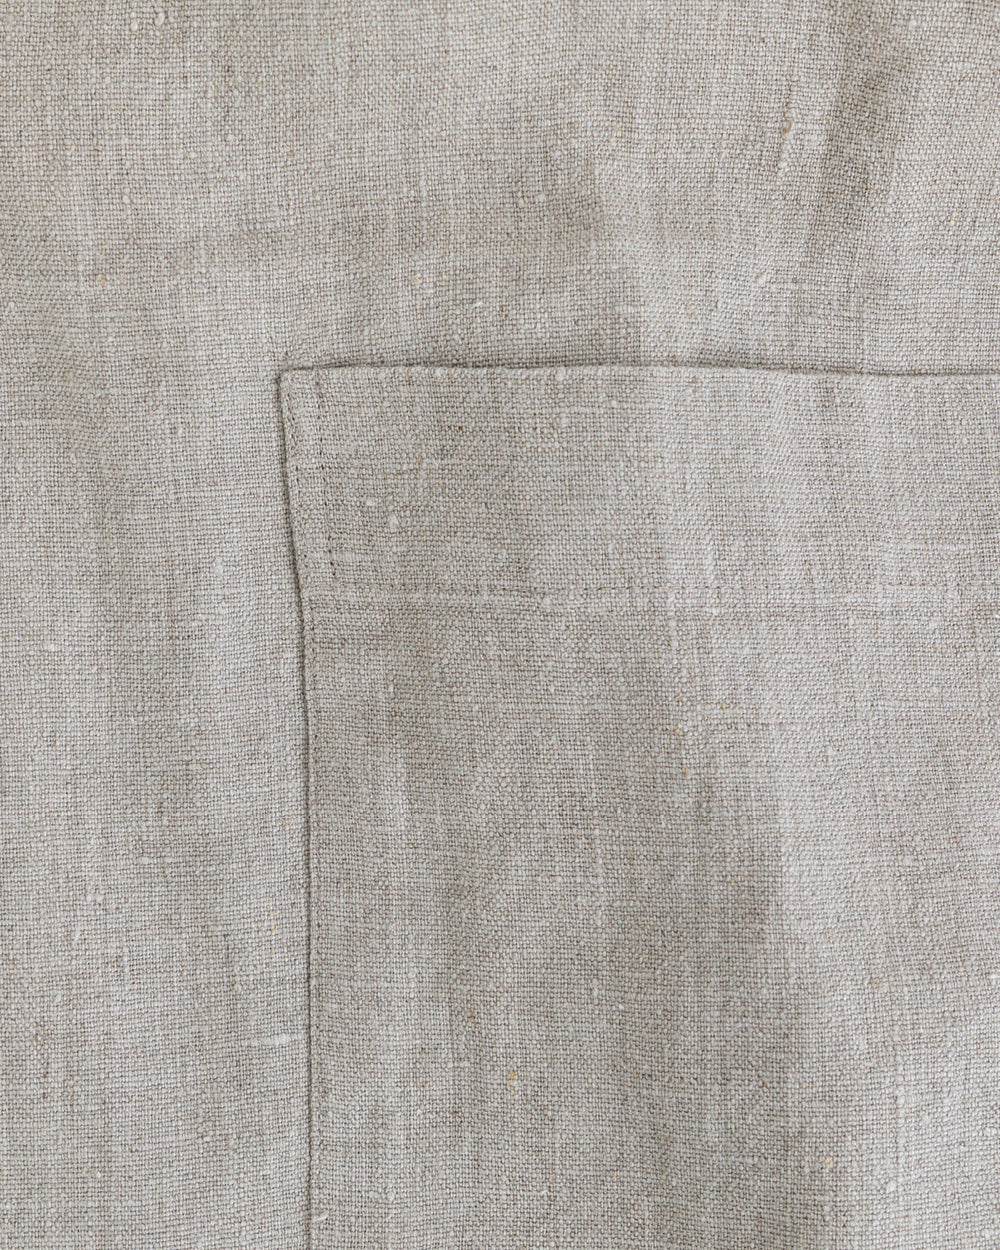 Close up detail of natural stone-washed linen apron